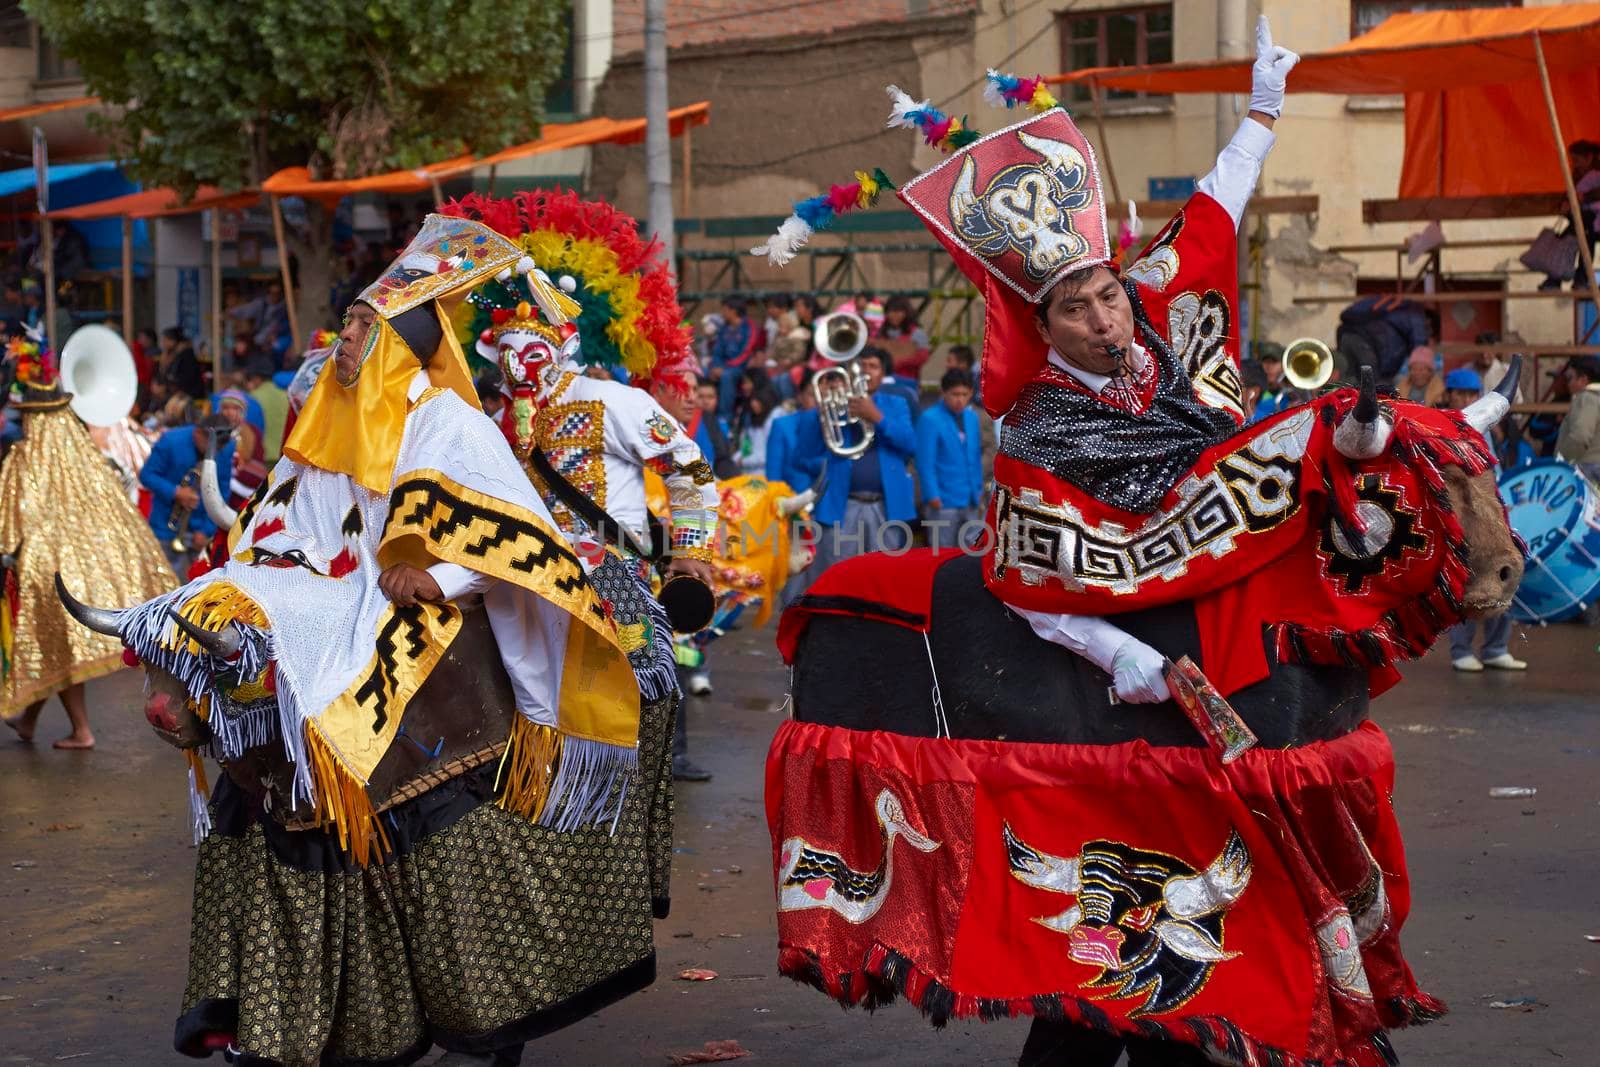 ORURO, BOLIVIA - FEBRUARY 25, 2017: Members of a Waca Waca dance group in ornate costume parade through the mining city of Oruro on the Altiplano of Bolivia during the annual carnival.